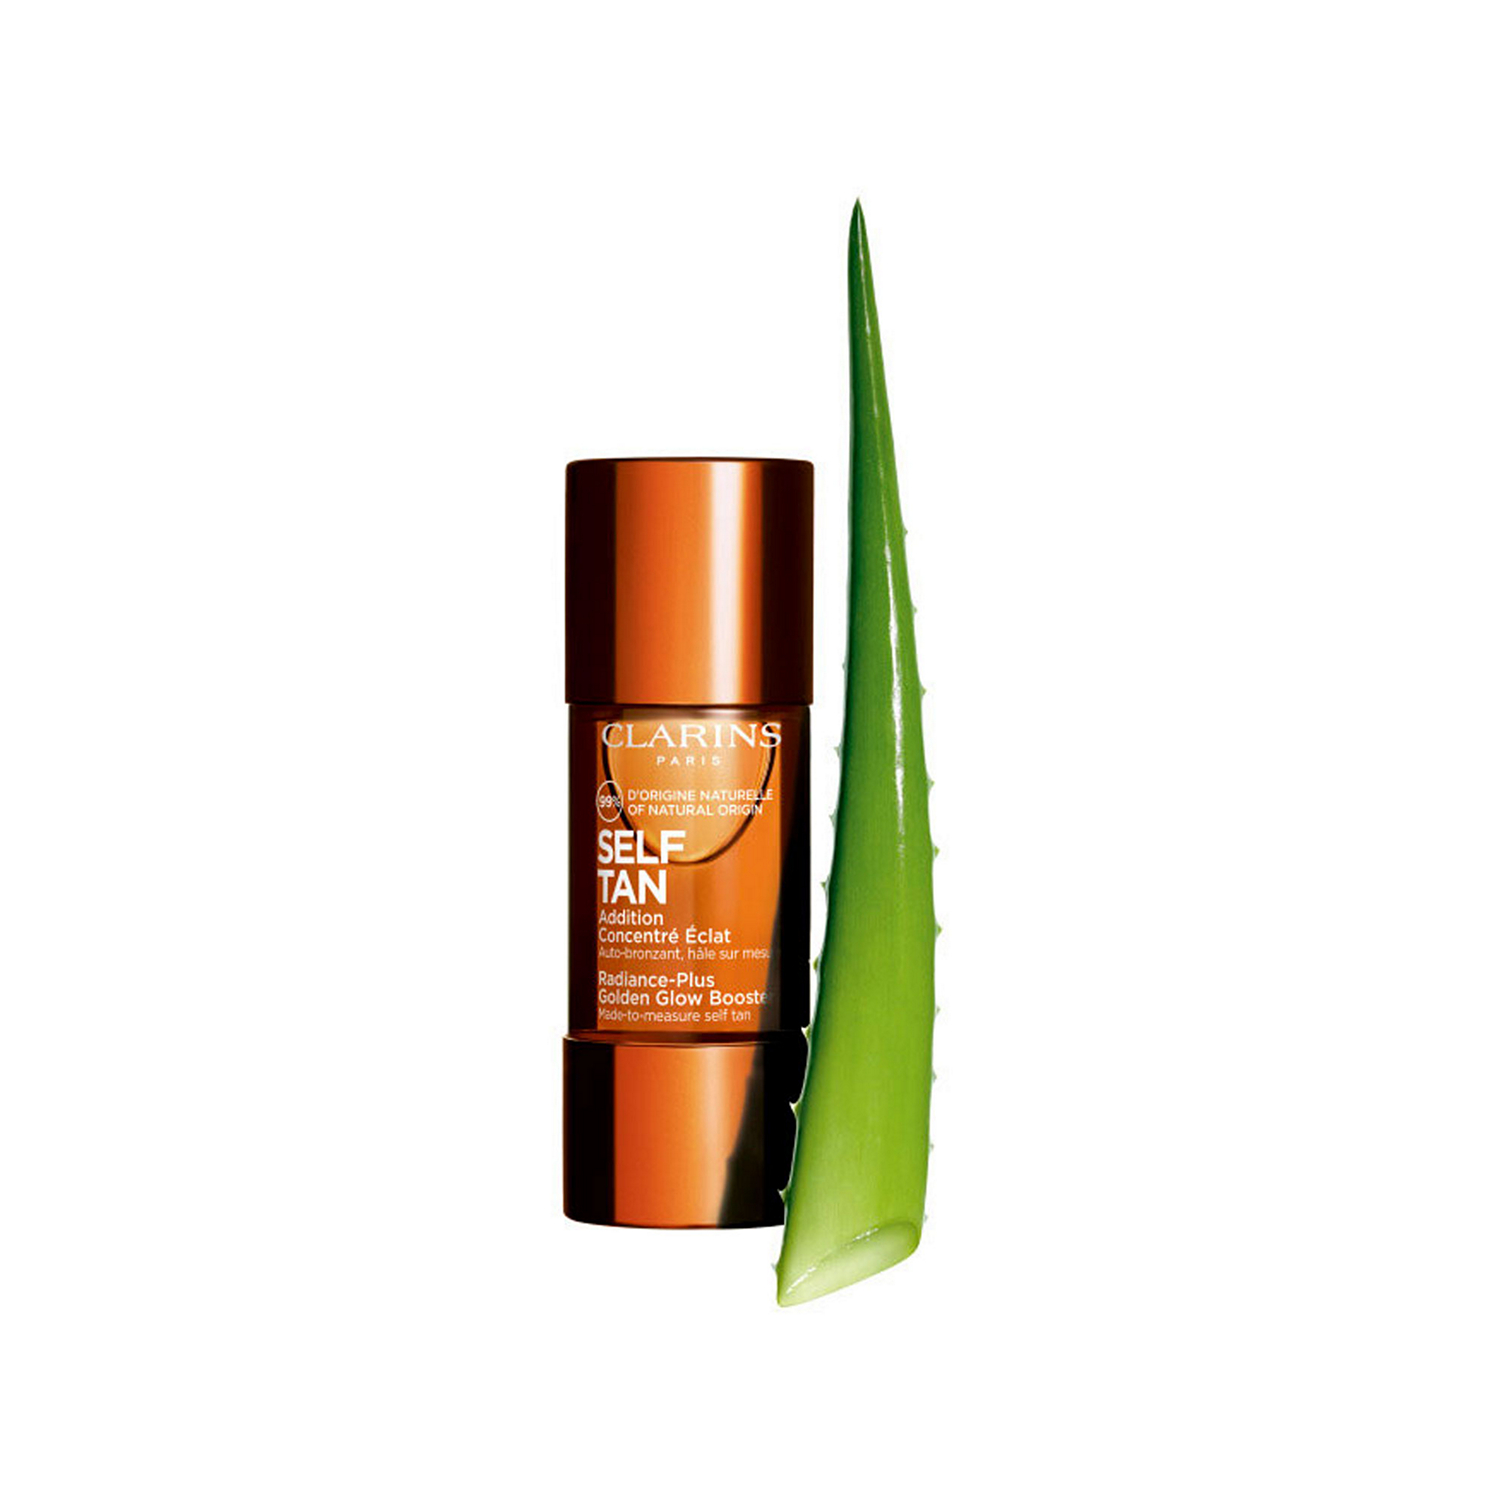 Self Tan Radiance-Plus Golden Glow Booster Face